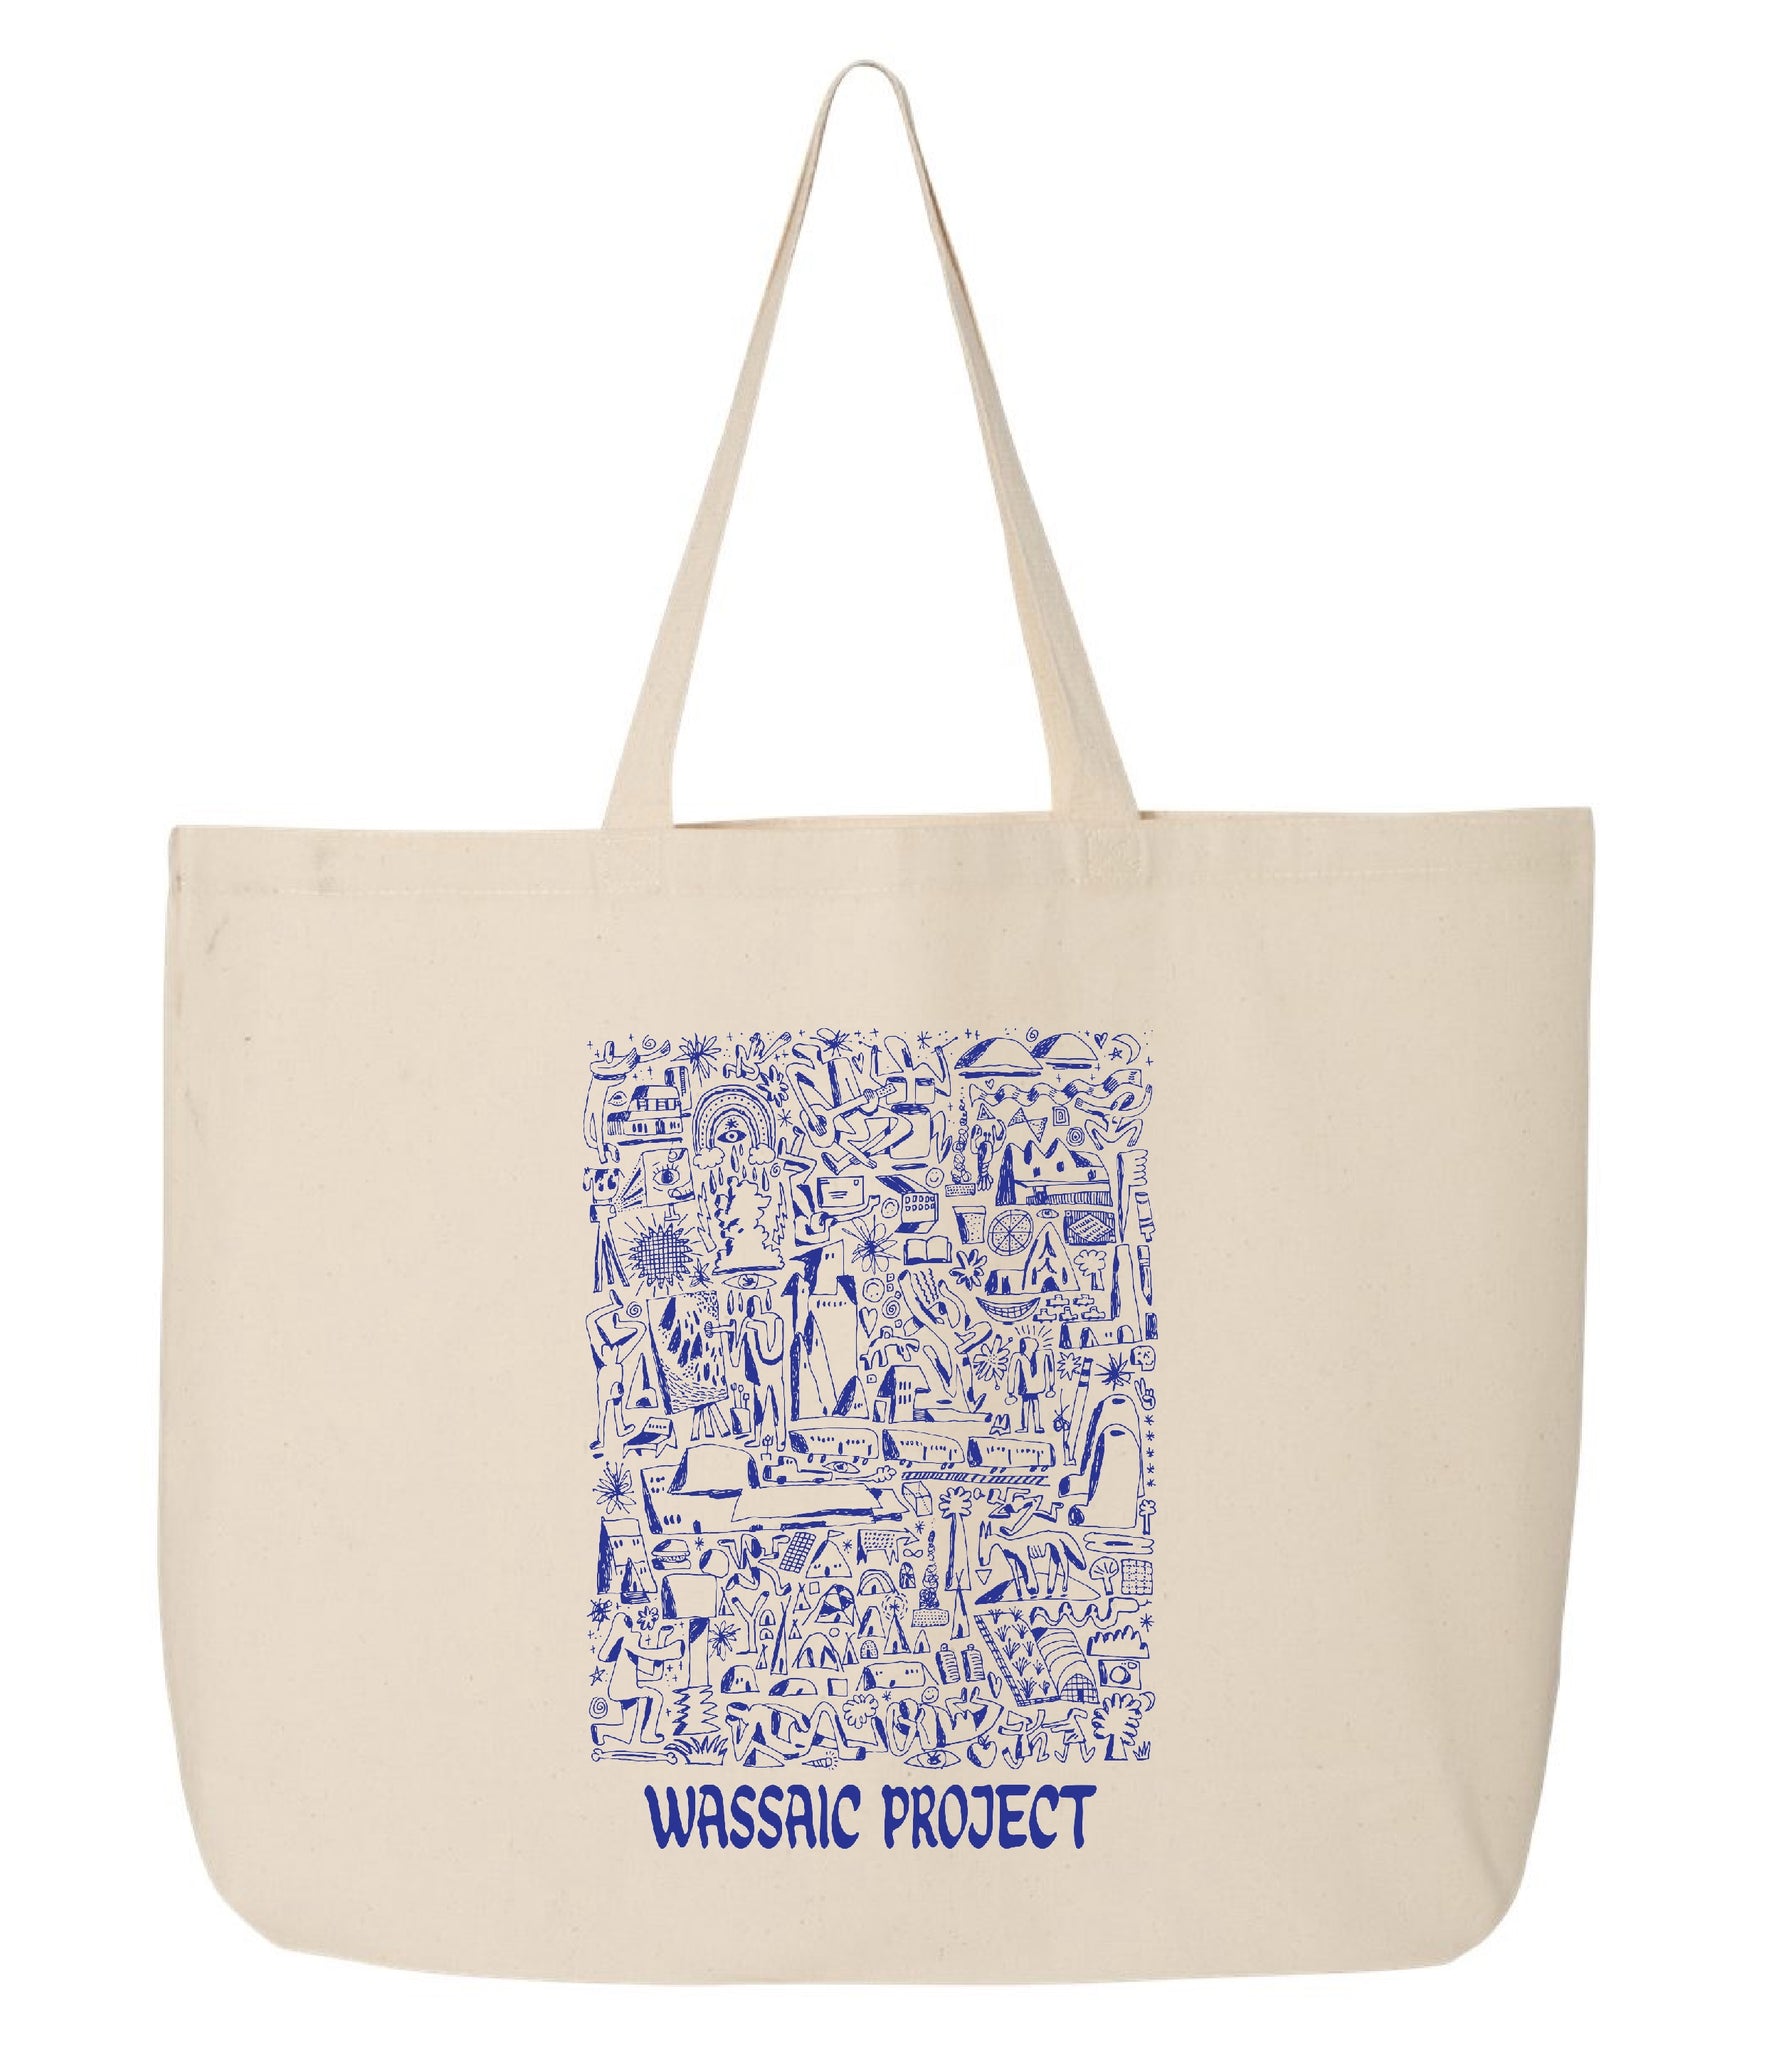 Wassaic Project Tote Bag